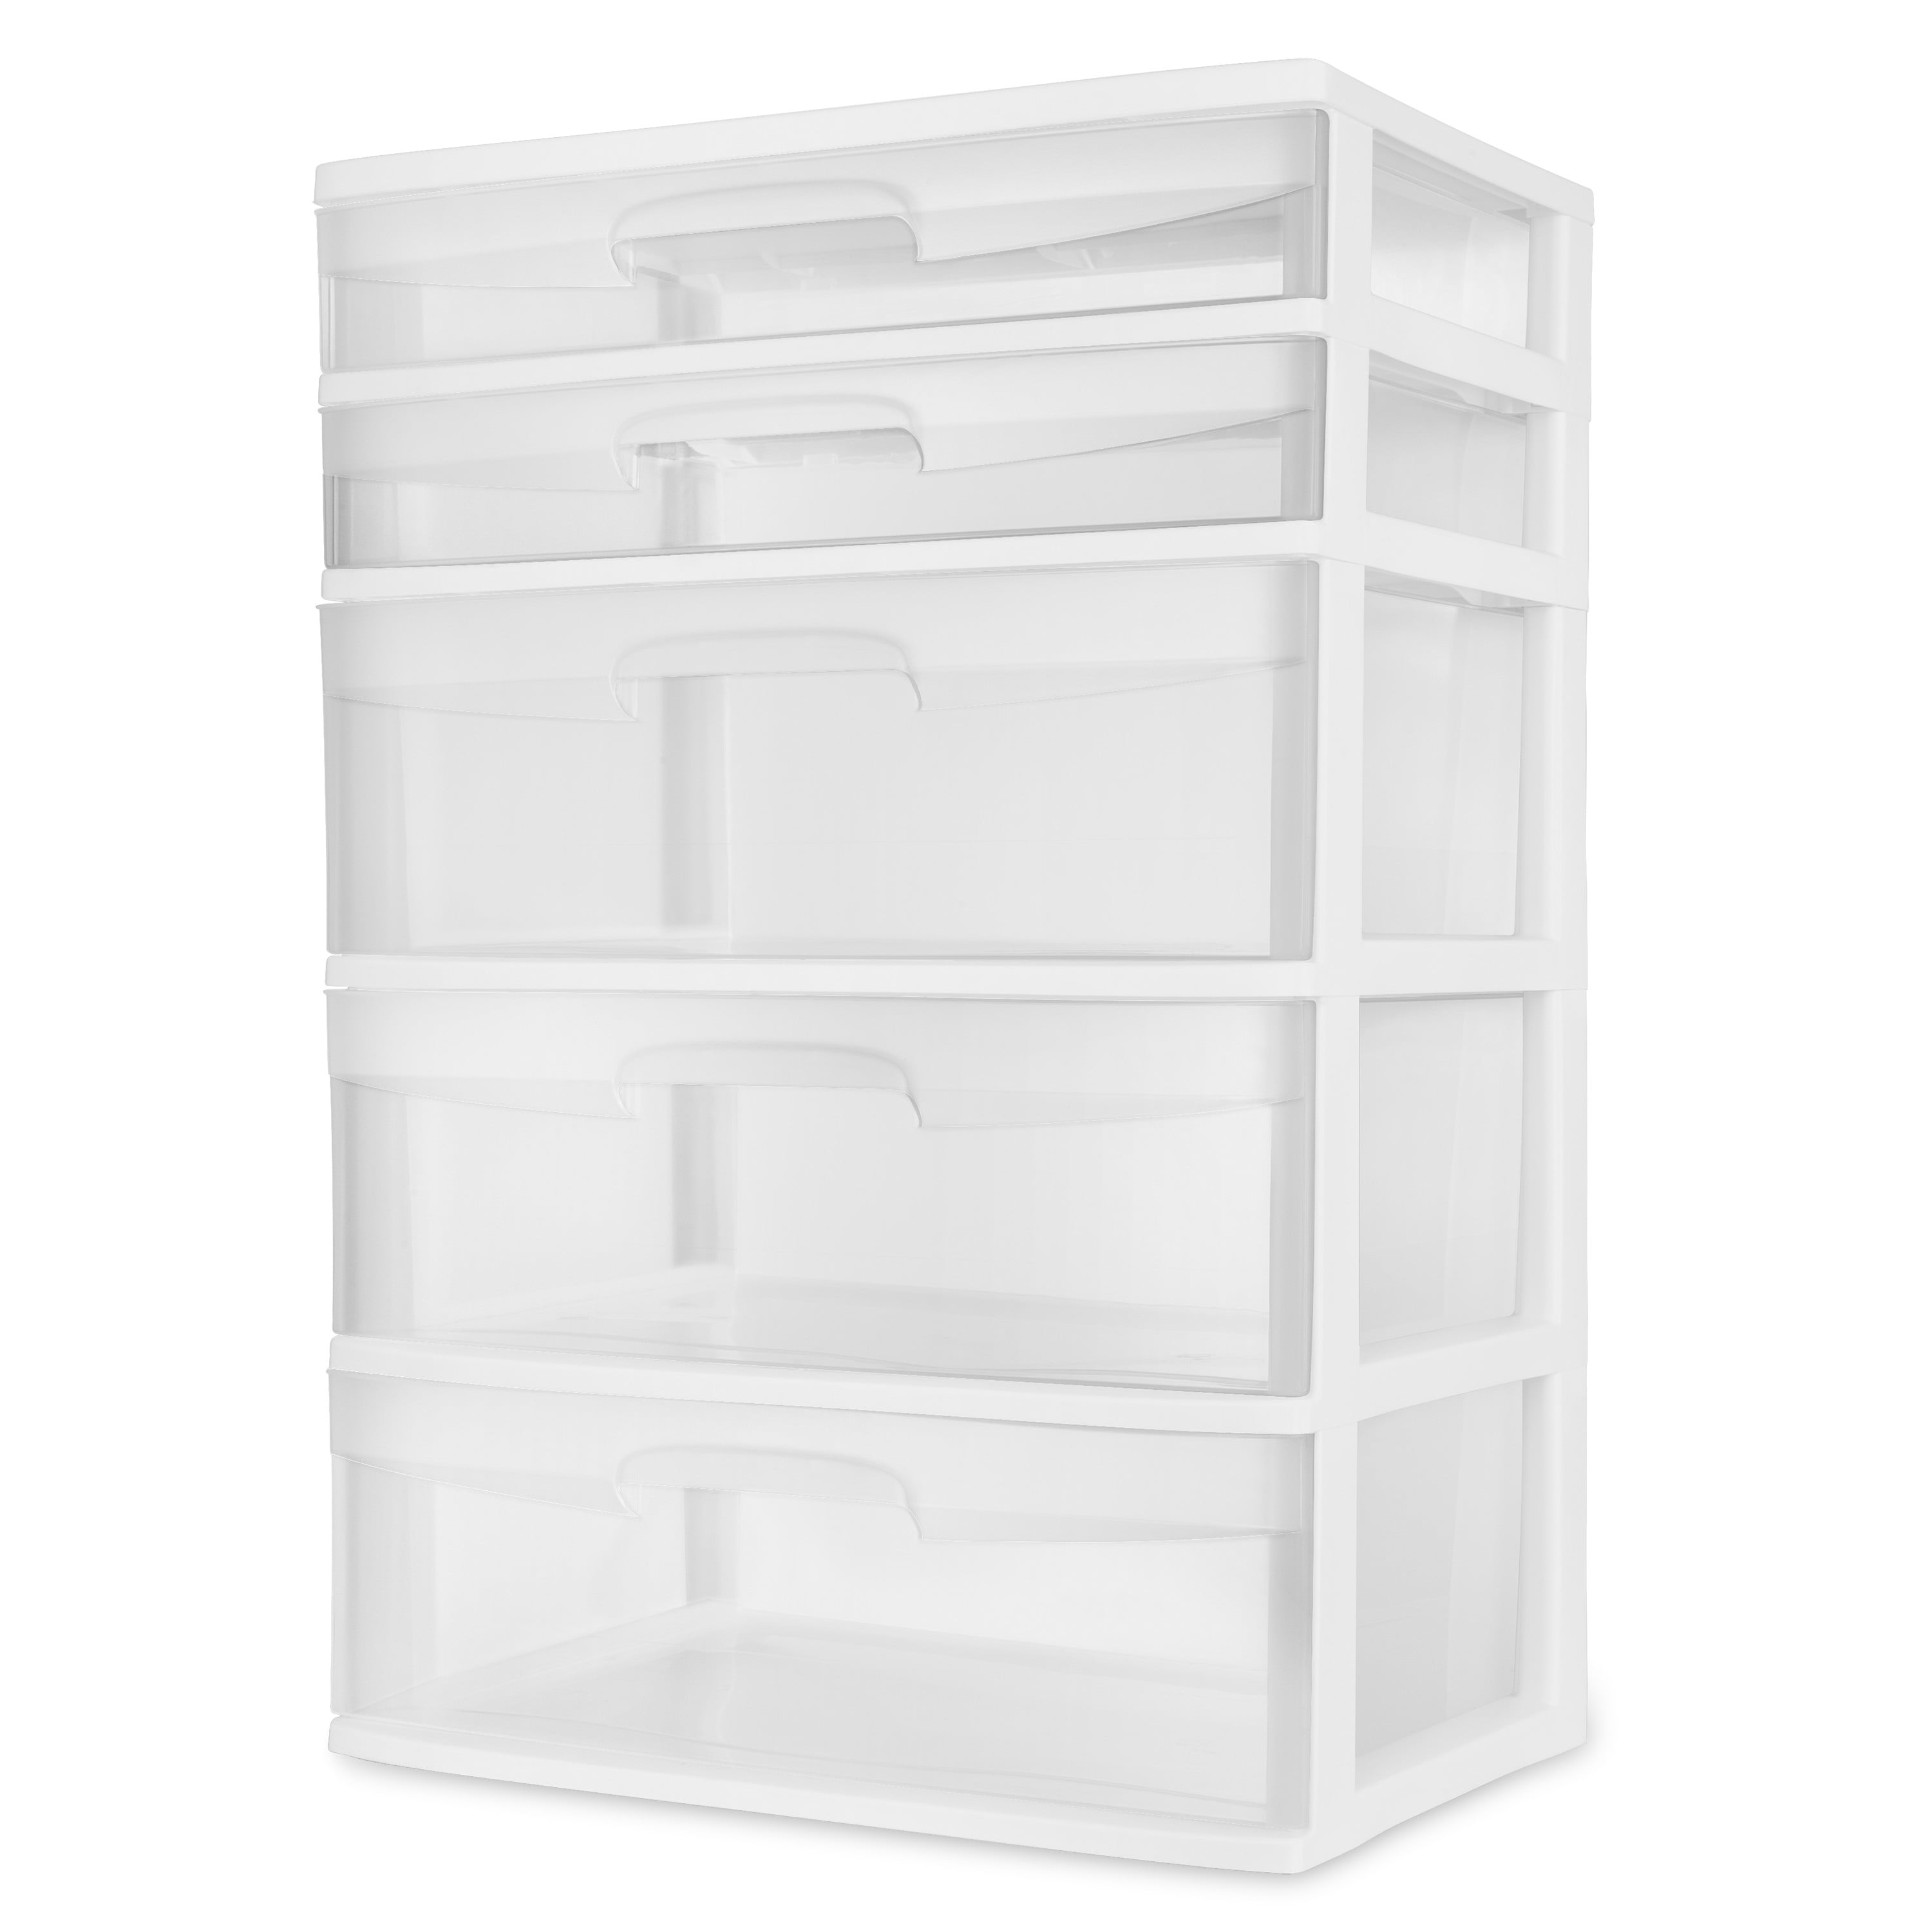 5 Drawer Wide Tower Storage Multi-purpose White/Clear 